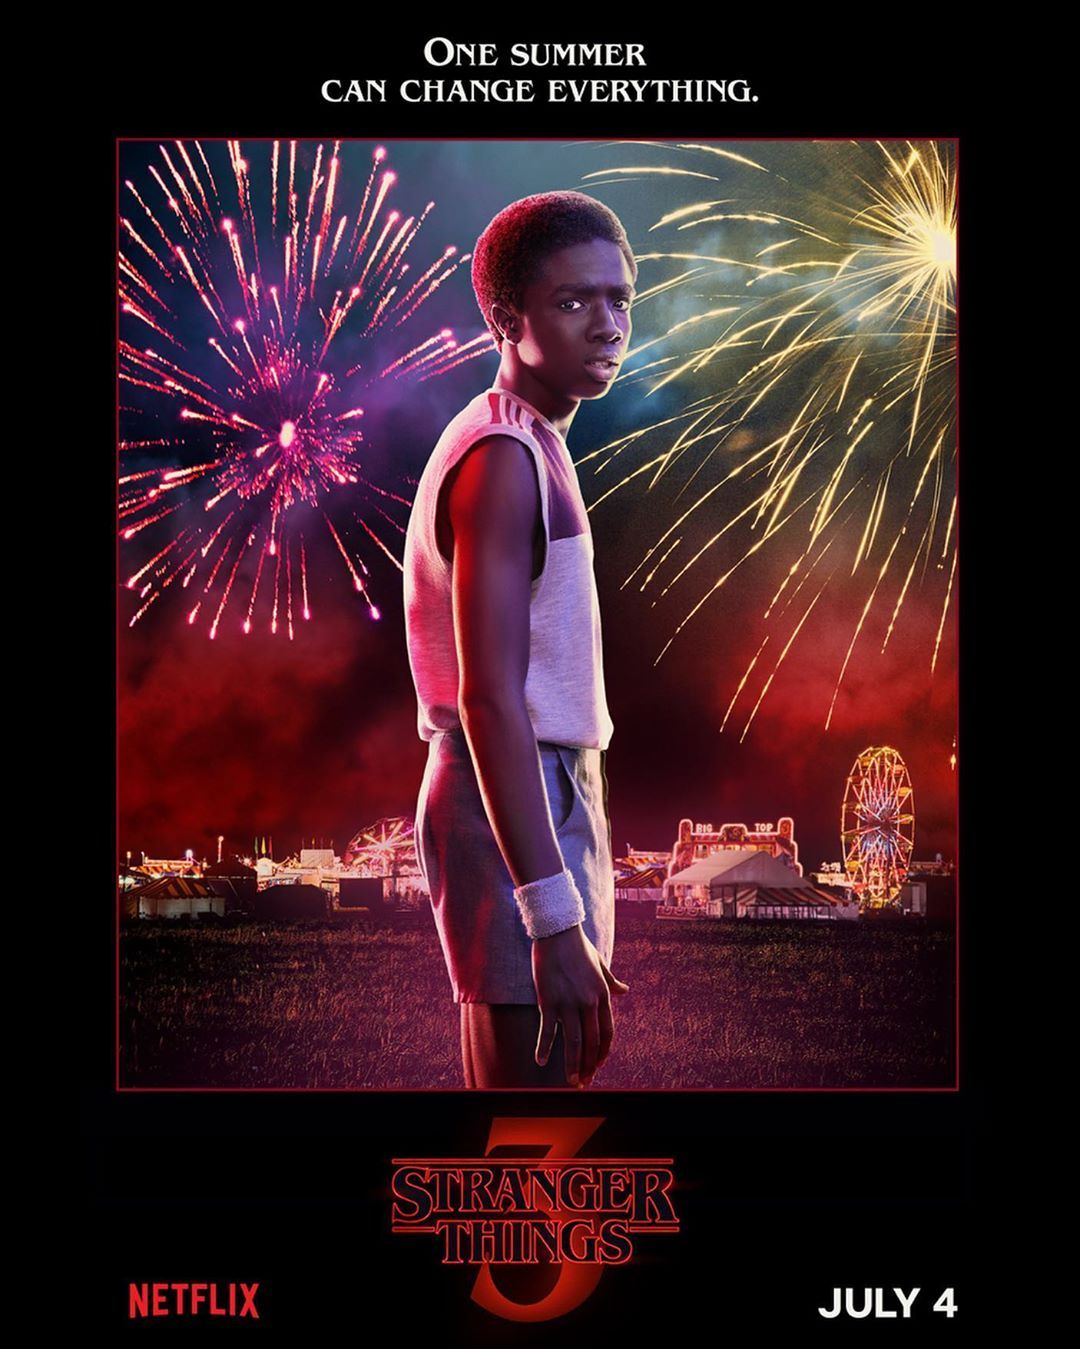 Stranger Things Season 3 Character Posters Bring the Fireworks